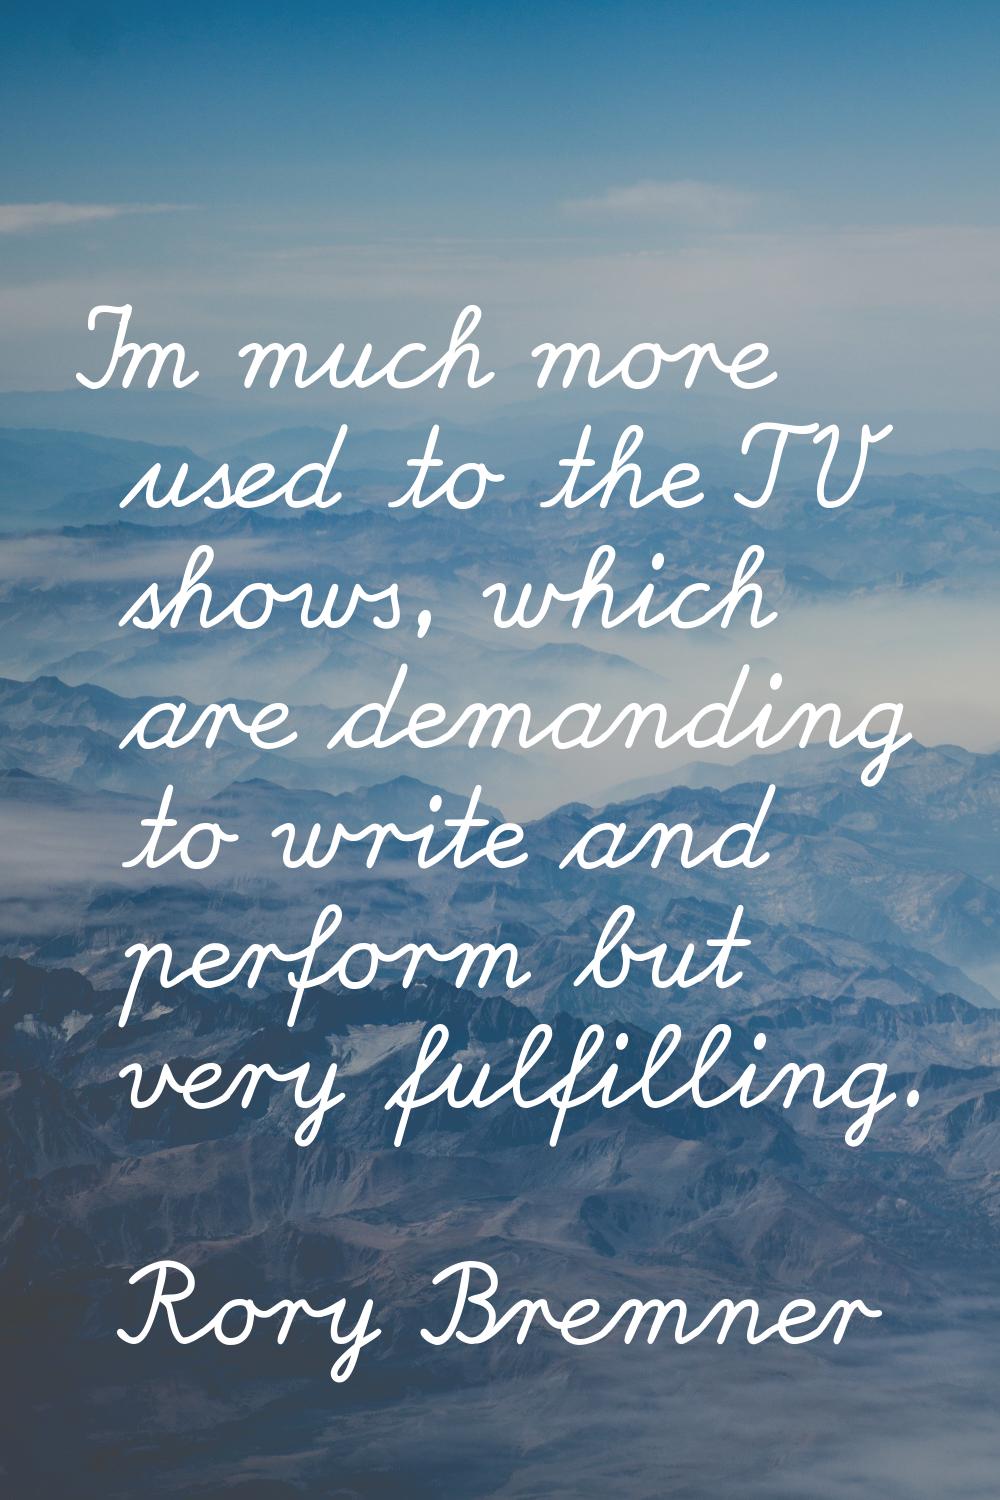 I'm much more used to the TV shows, which are demanding to write and perform but very fulfilling.